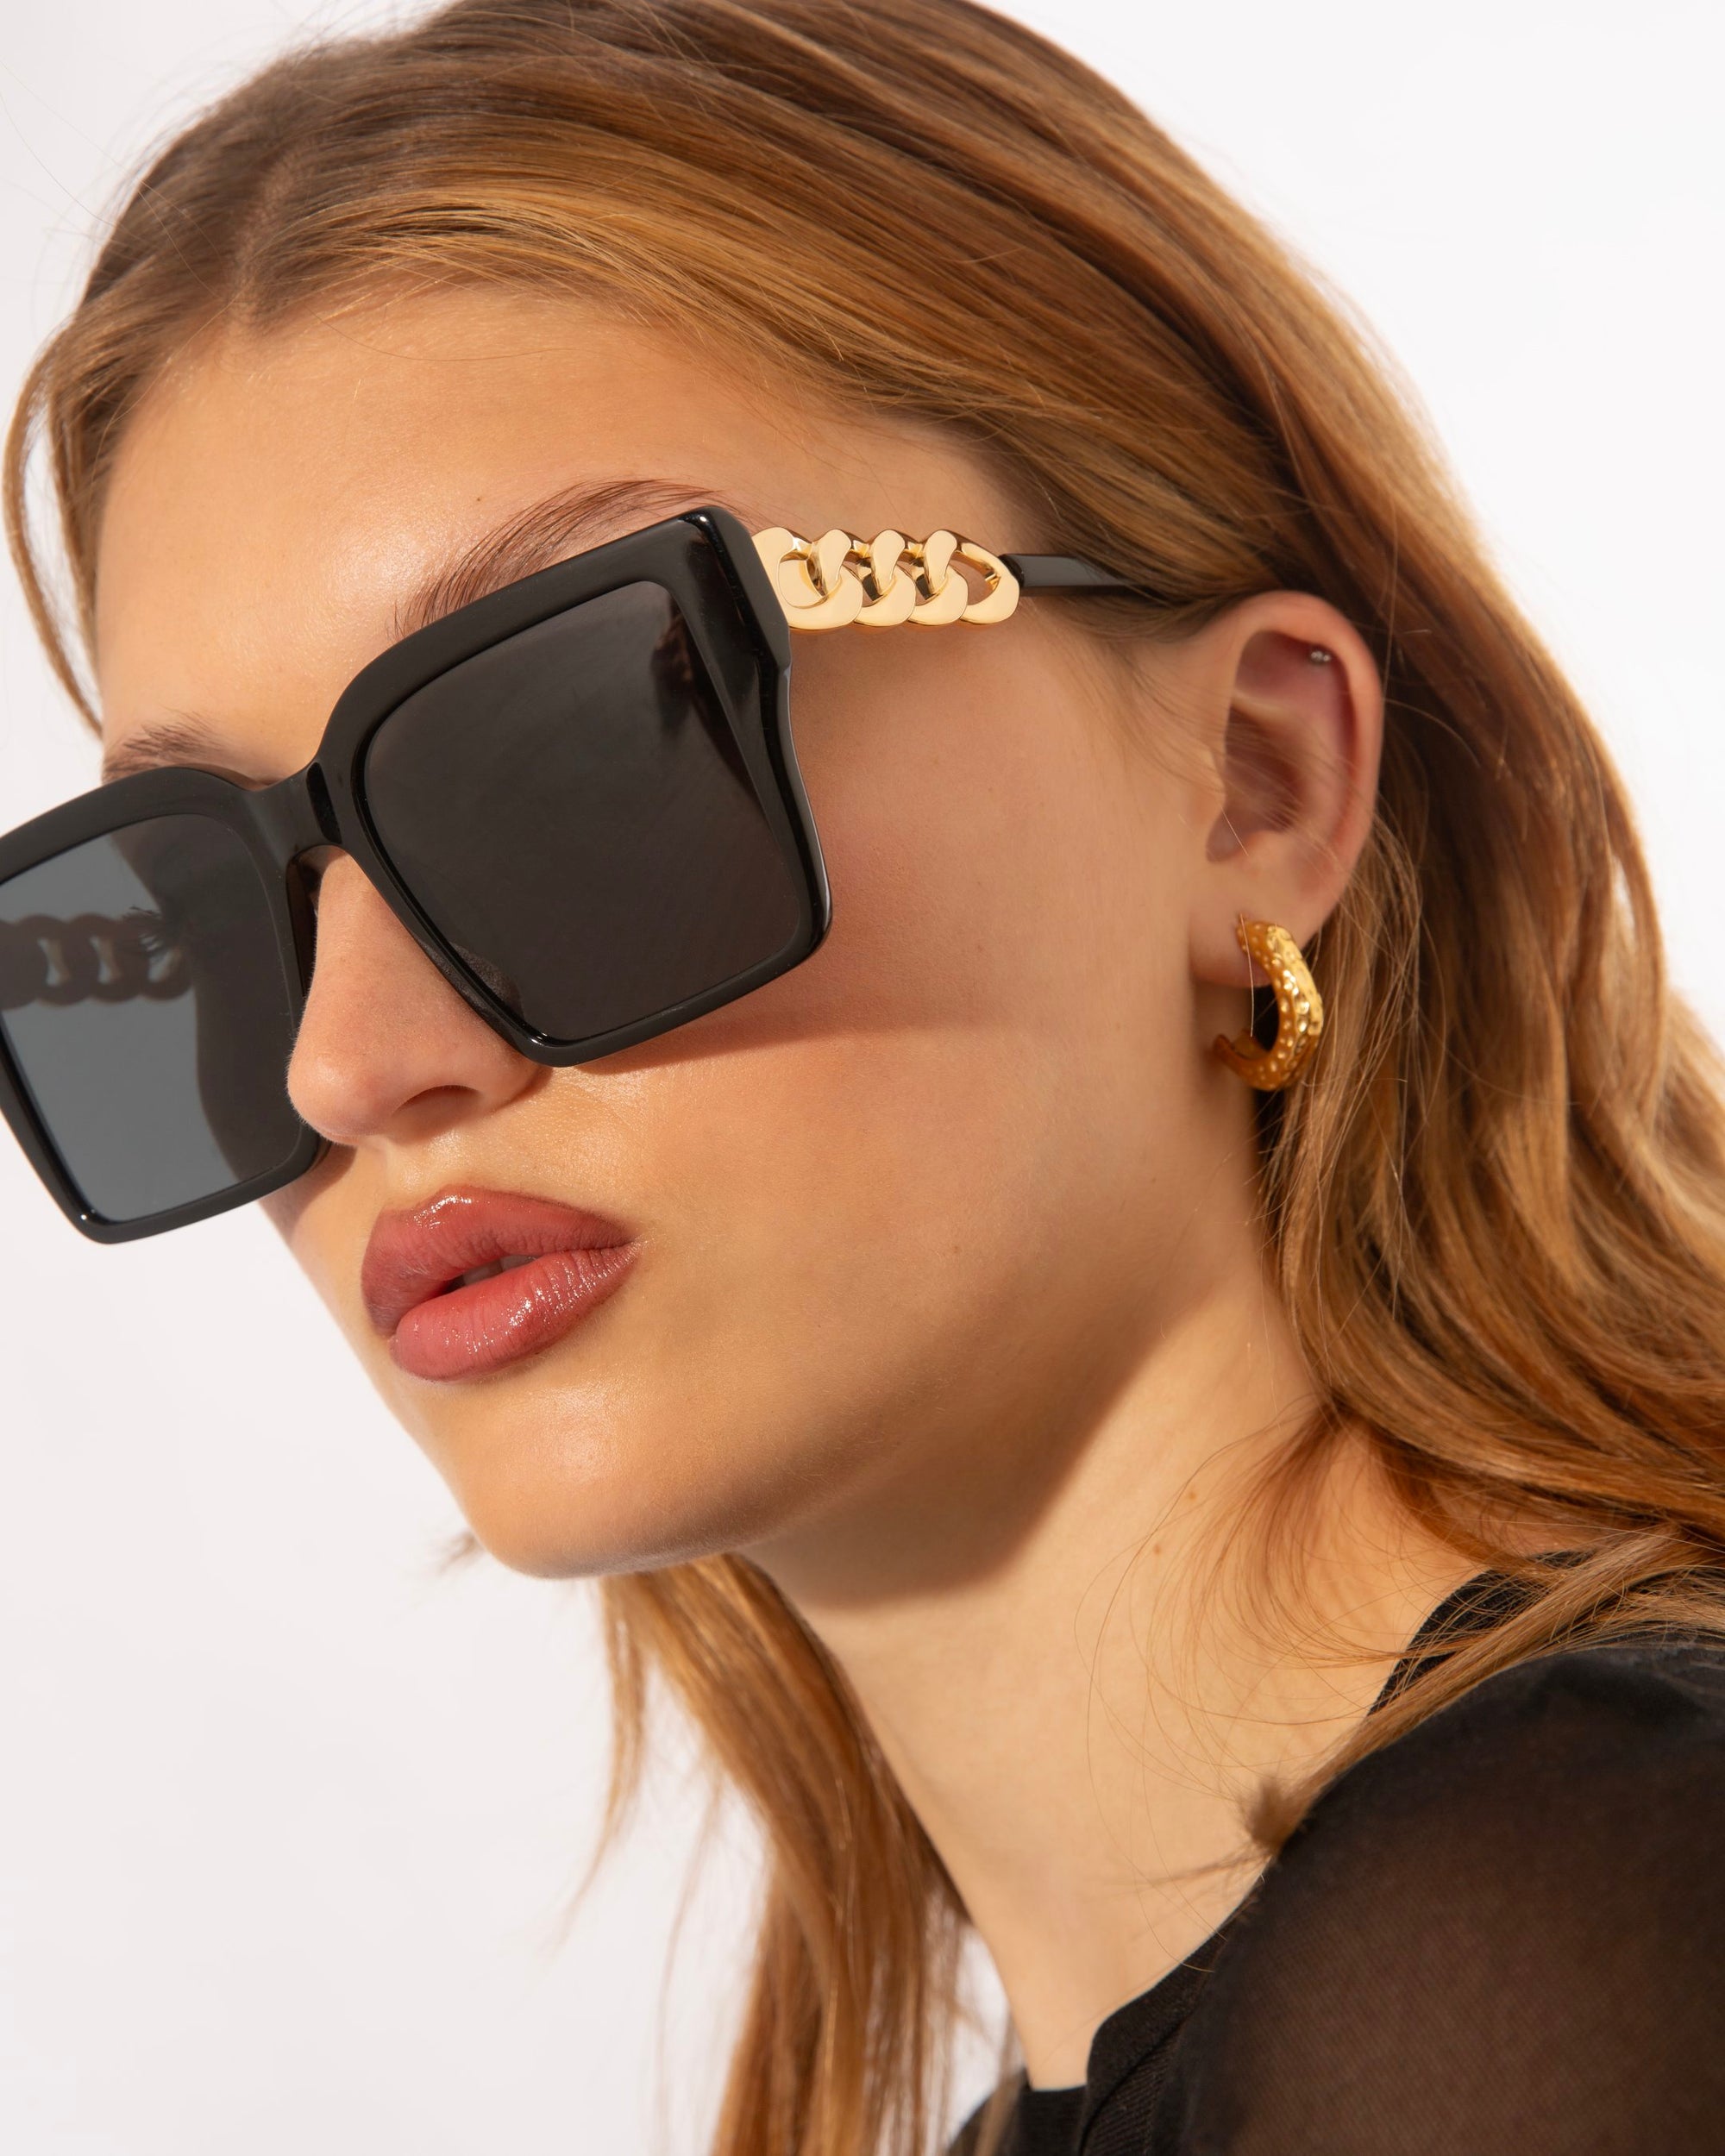 A woman with long, blonde hair wears oversized square-shaped black For Art's Sake® Castle sunglasses featuring an 18-karat gold plated chain on the frames. She is also wearing small gold hoop earrings and a black top. The background is plain white.